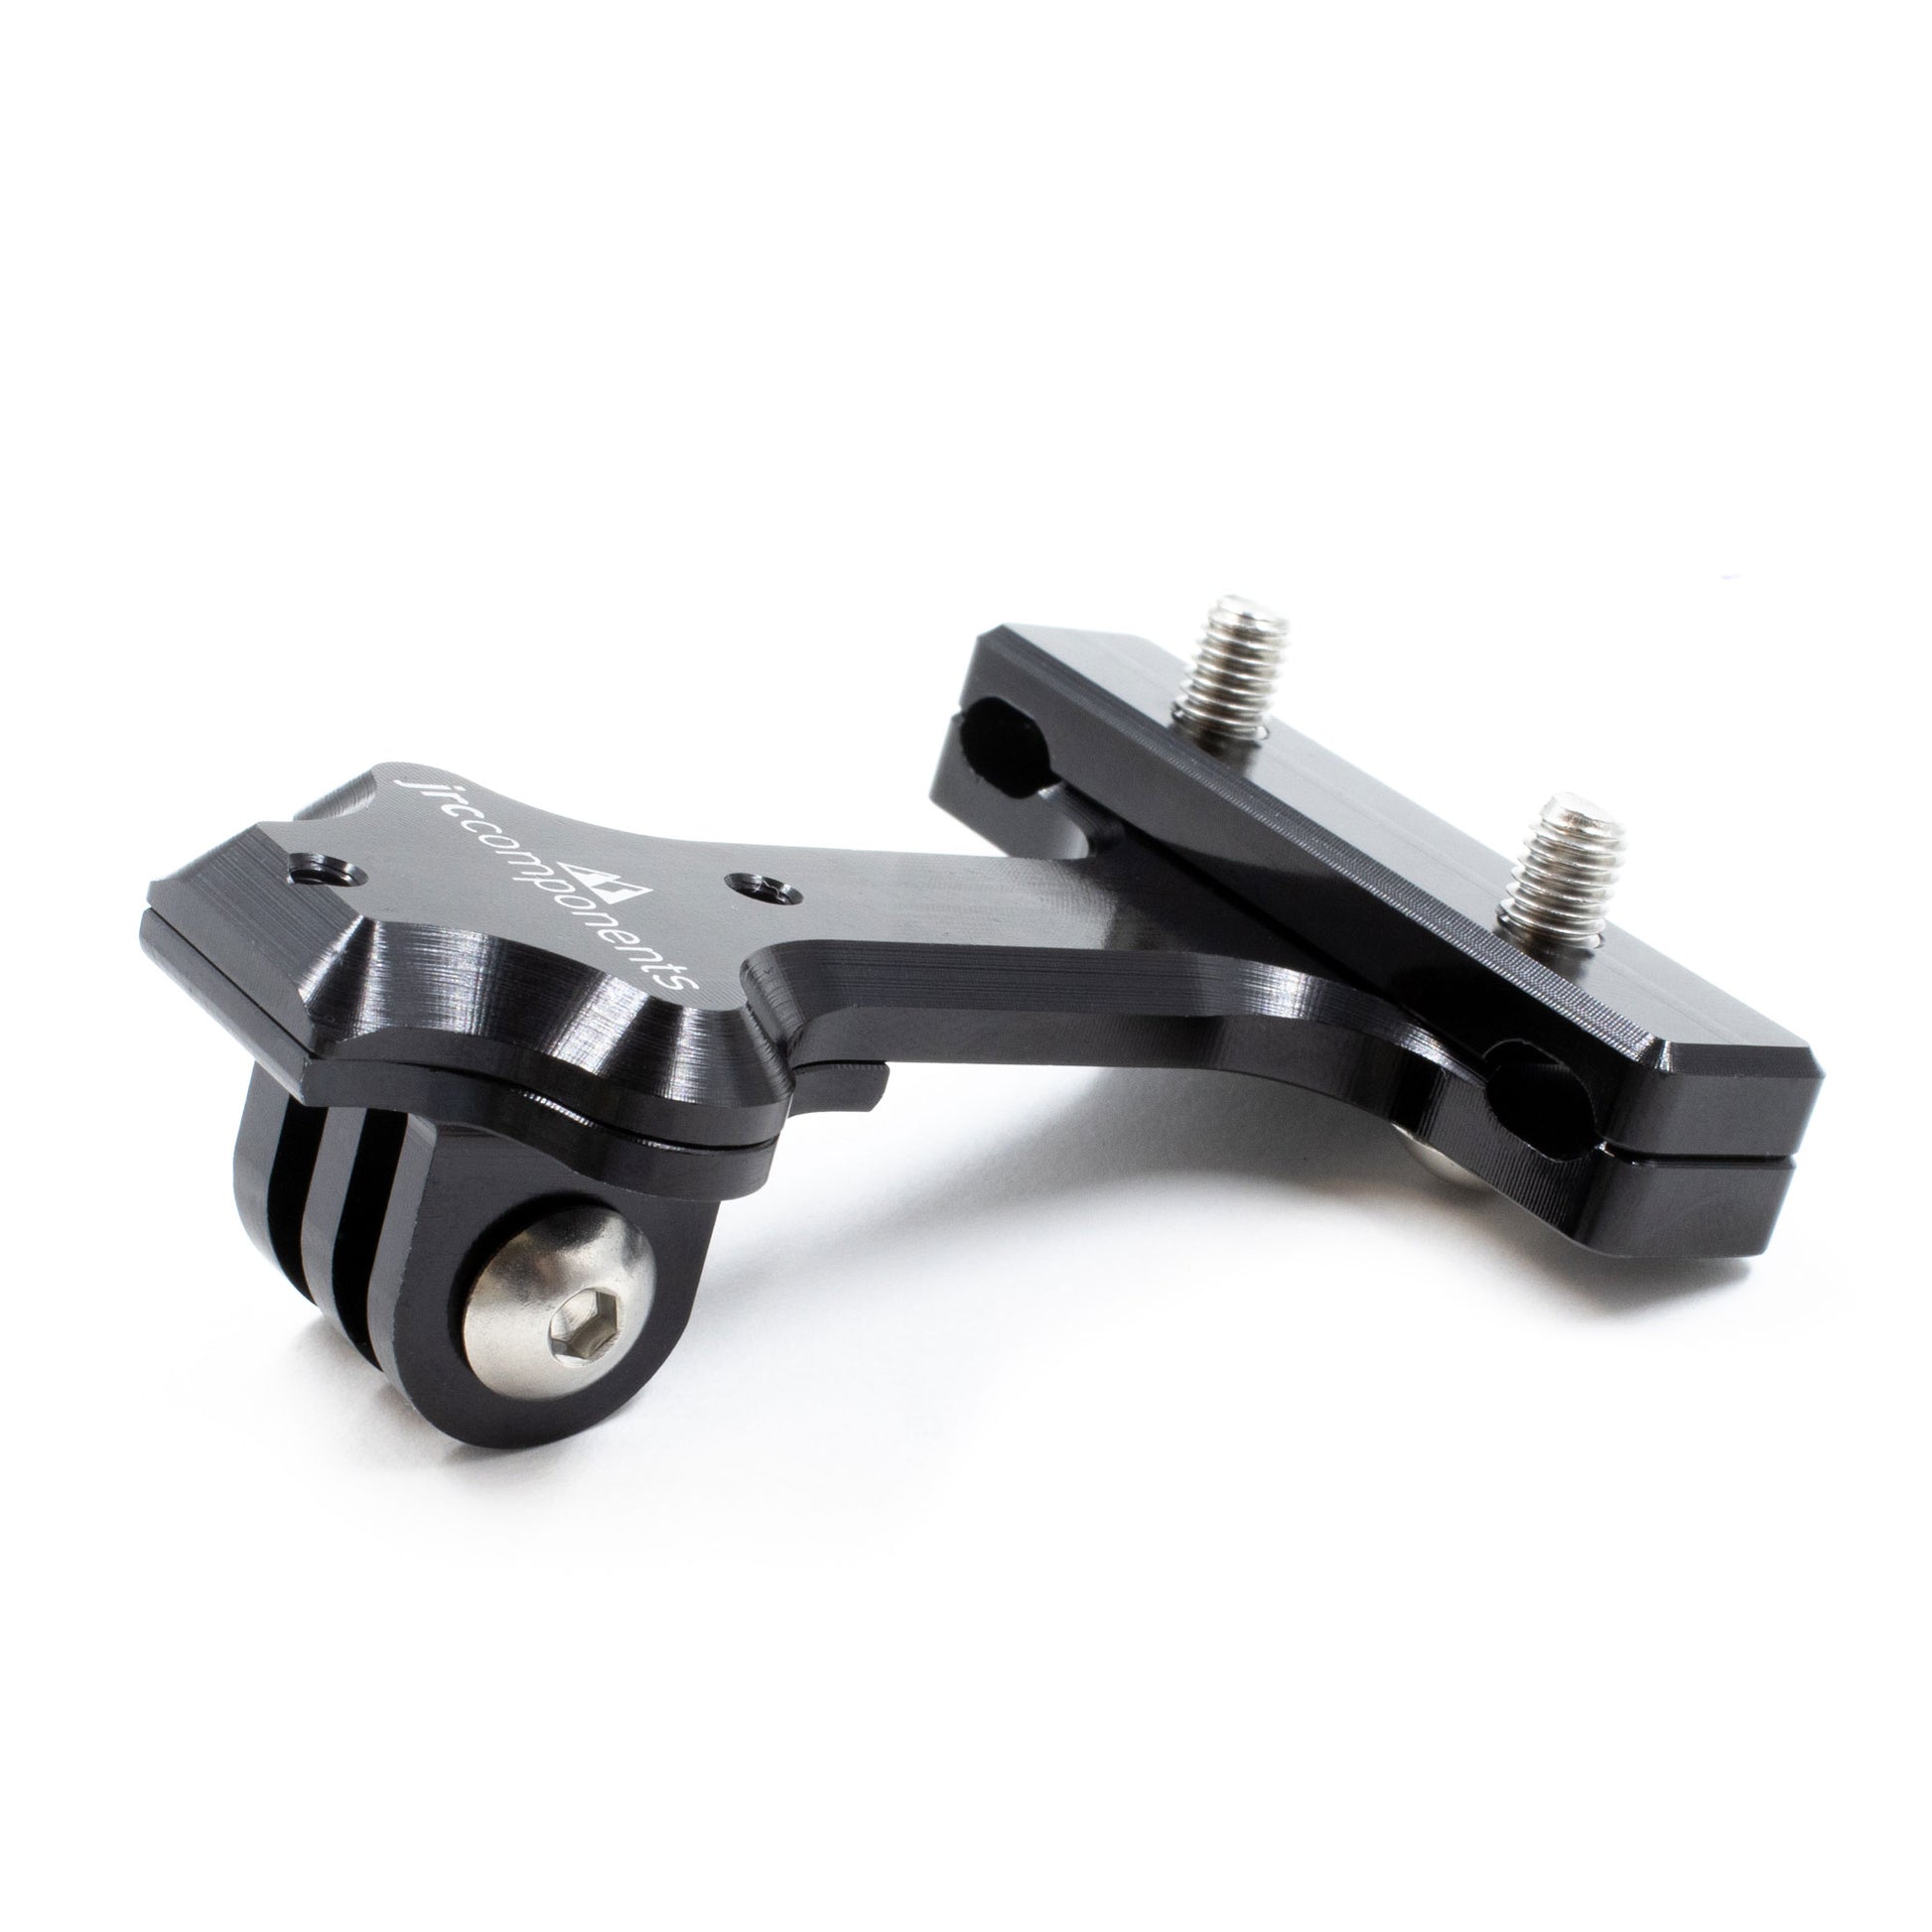 Black saddle rail mount with adaptor piece for rear lights and action cameras. View of adaptor from side.